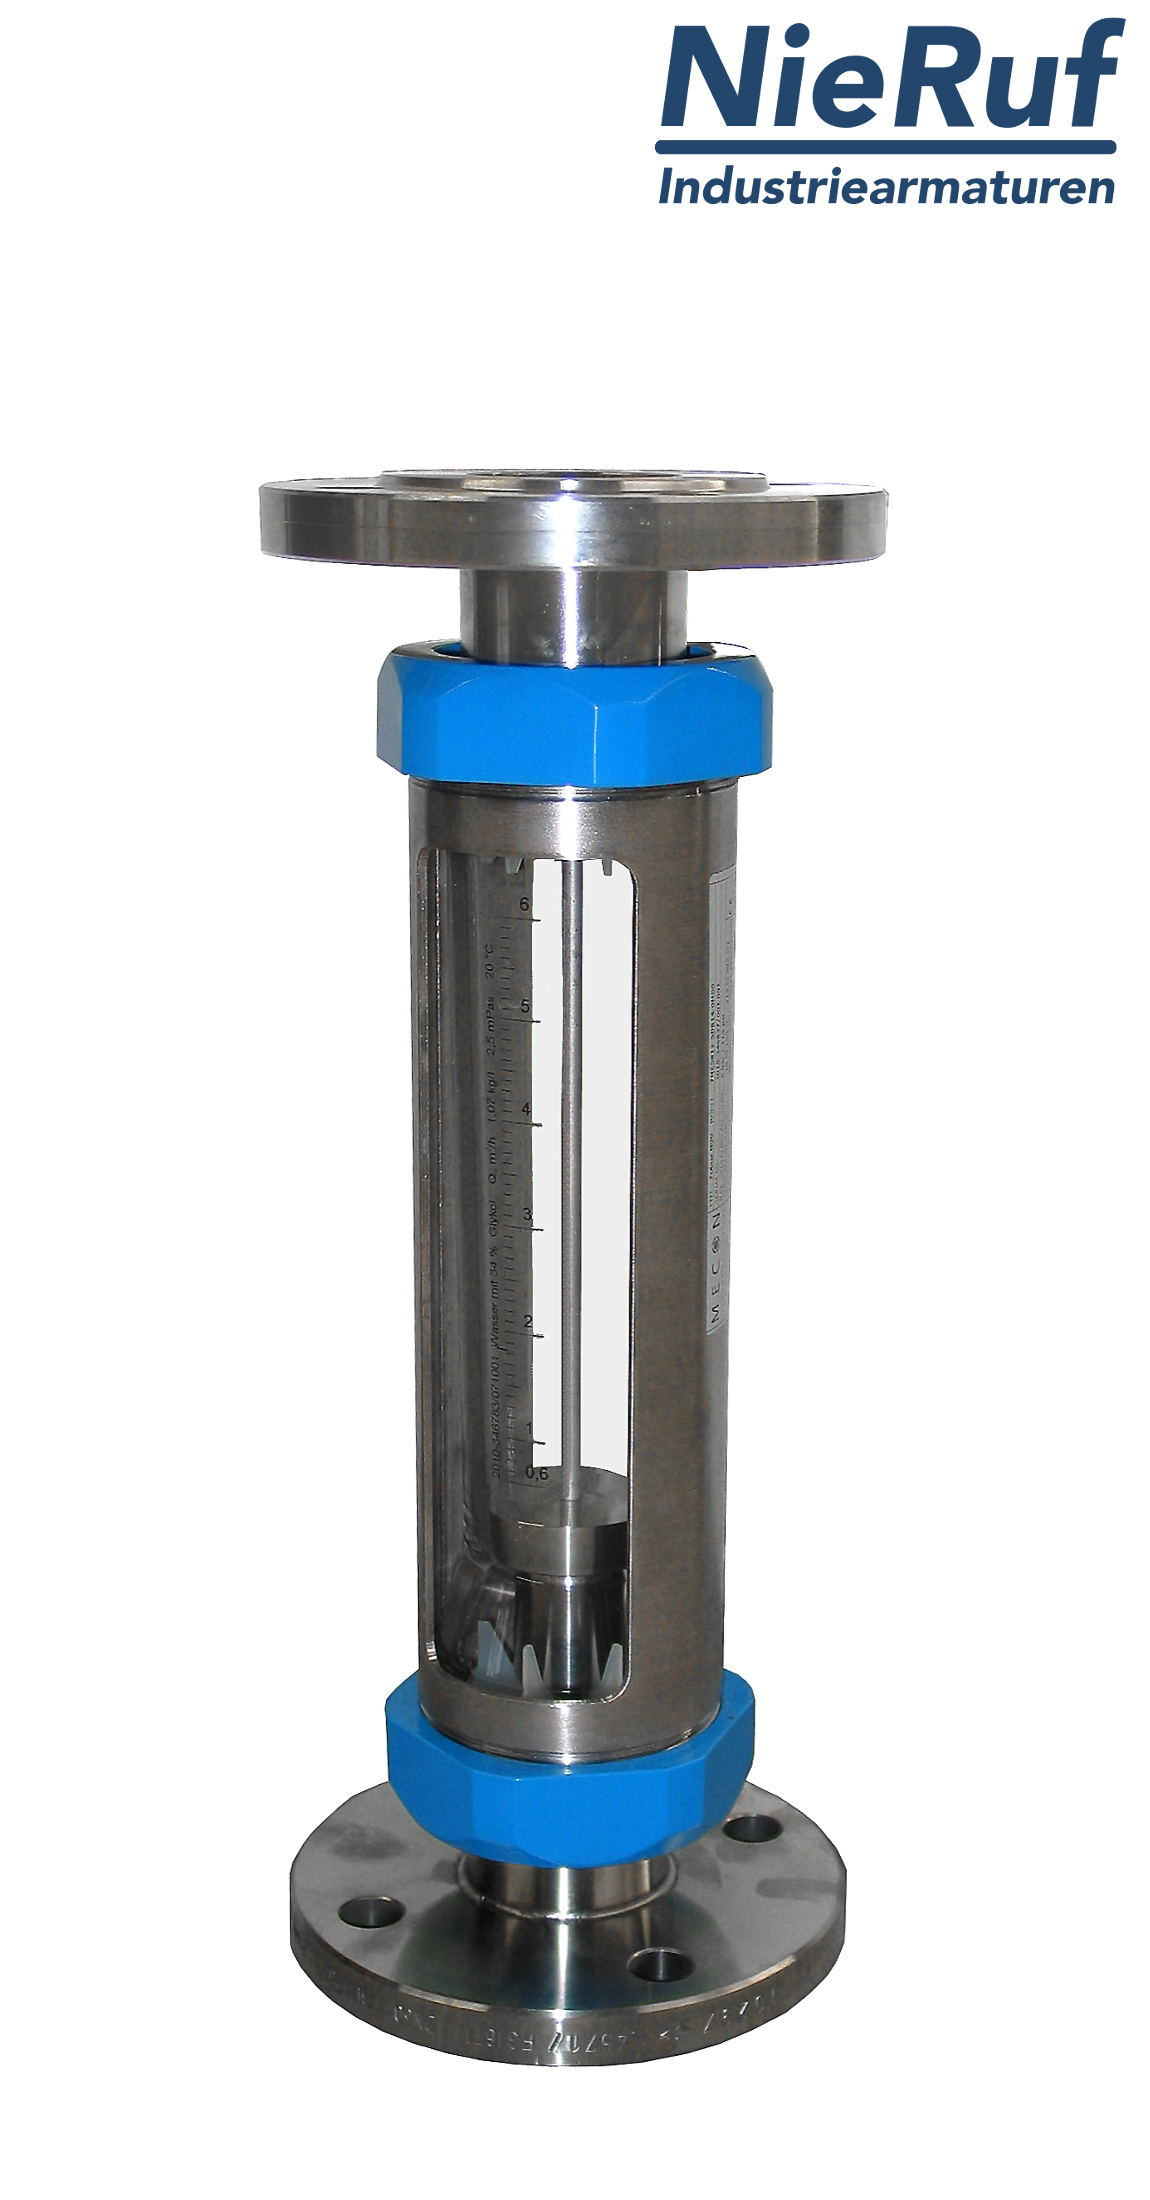 Variable area flowmeter stainless steel + borosilicate flange DN15 50.0 - 500.0 l/h water FKM